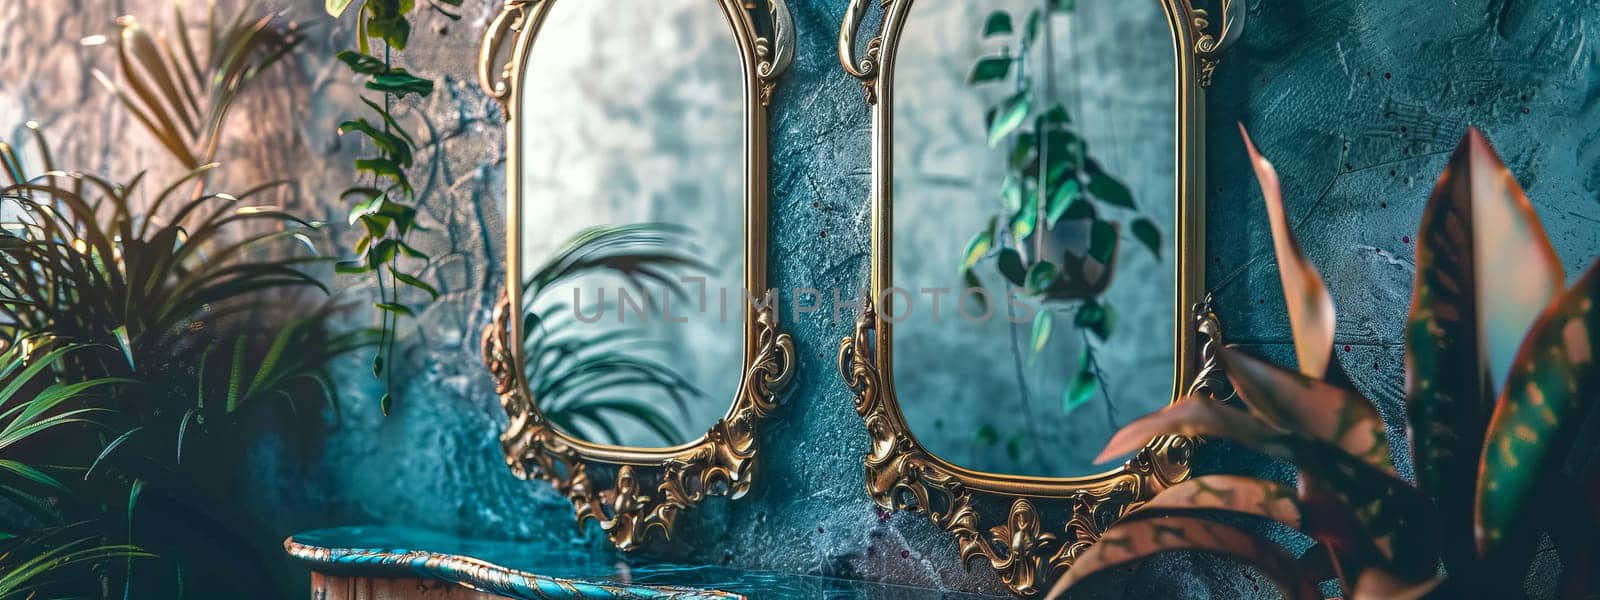 Vintage reflections in elegant mirrors with plants by Edophoto